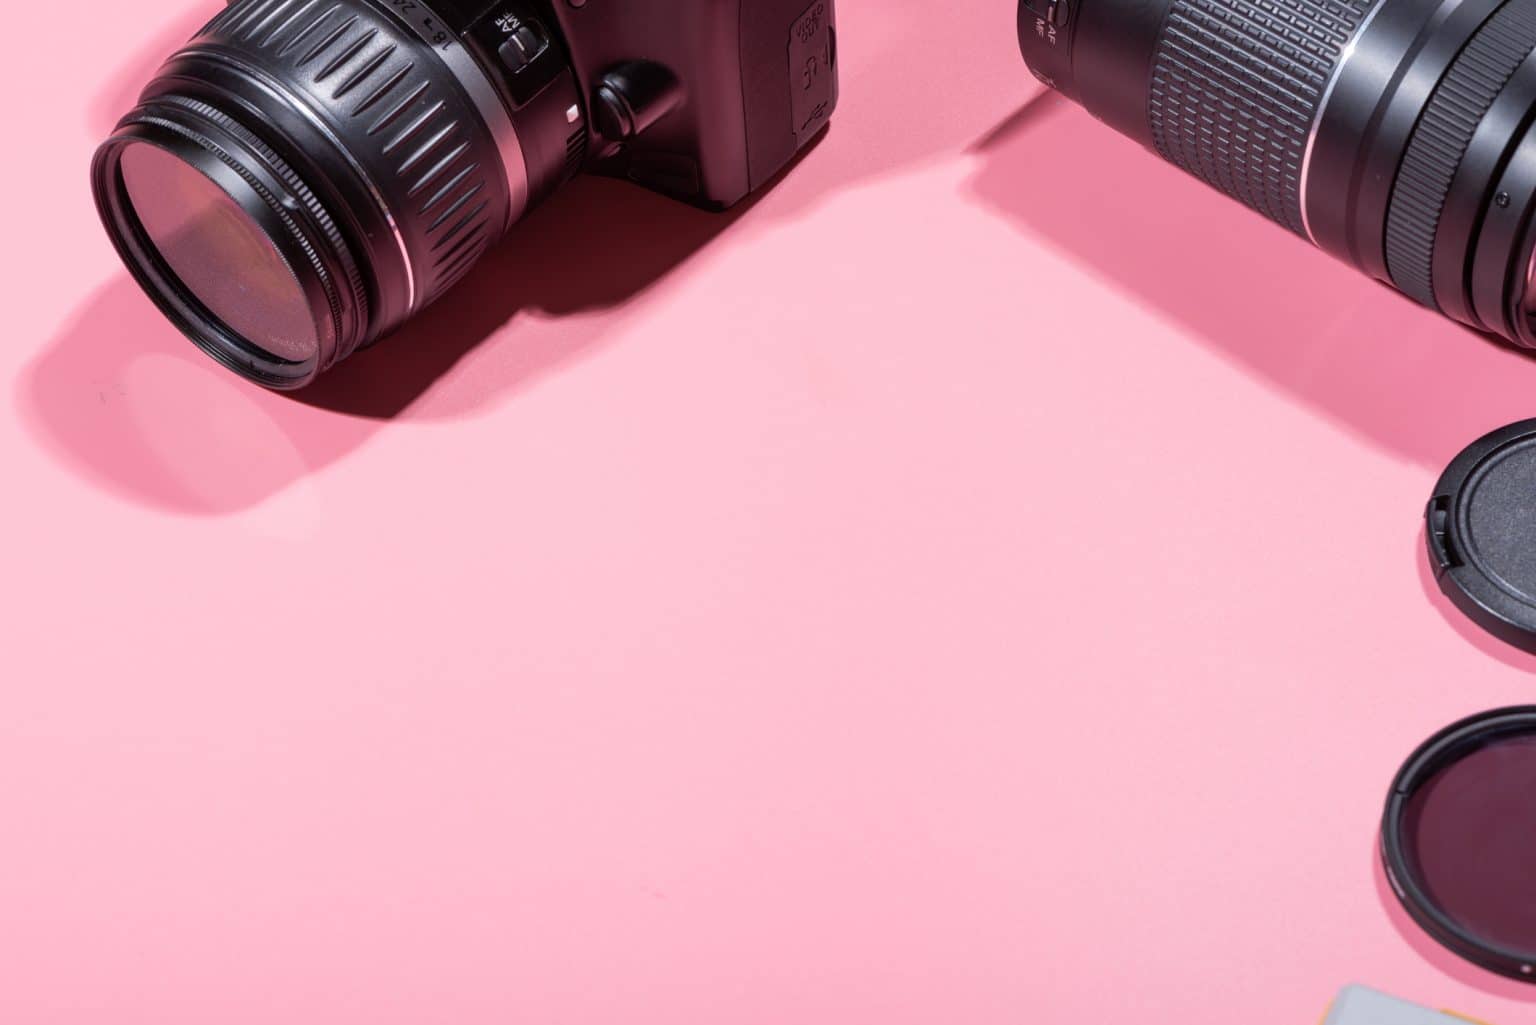 cameras and accessories on a pink background